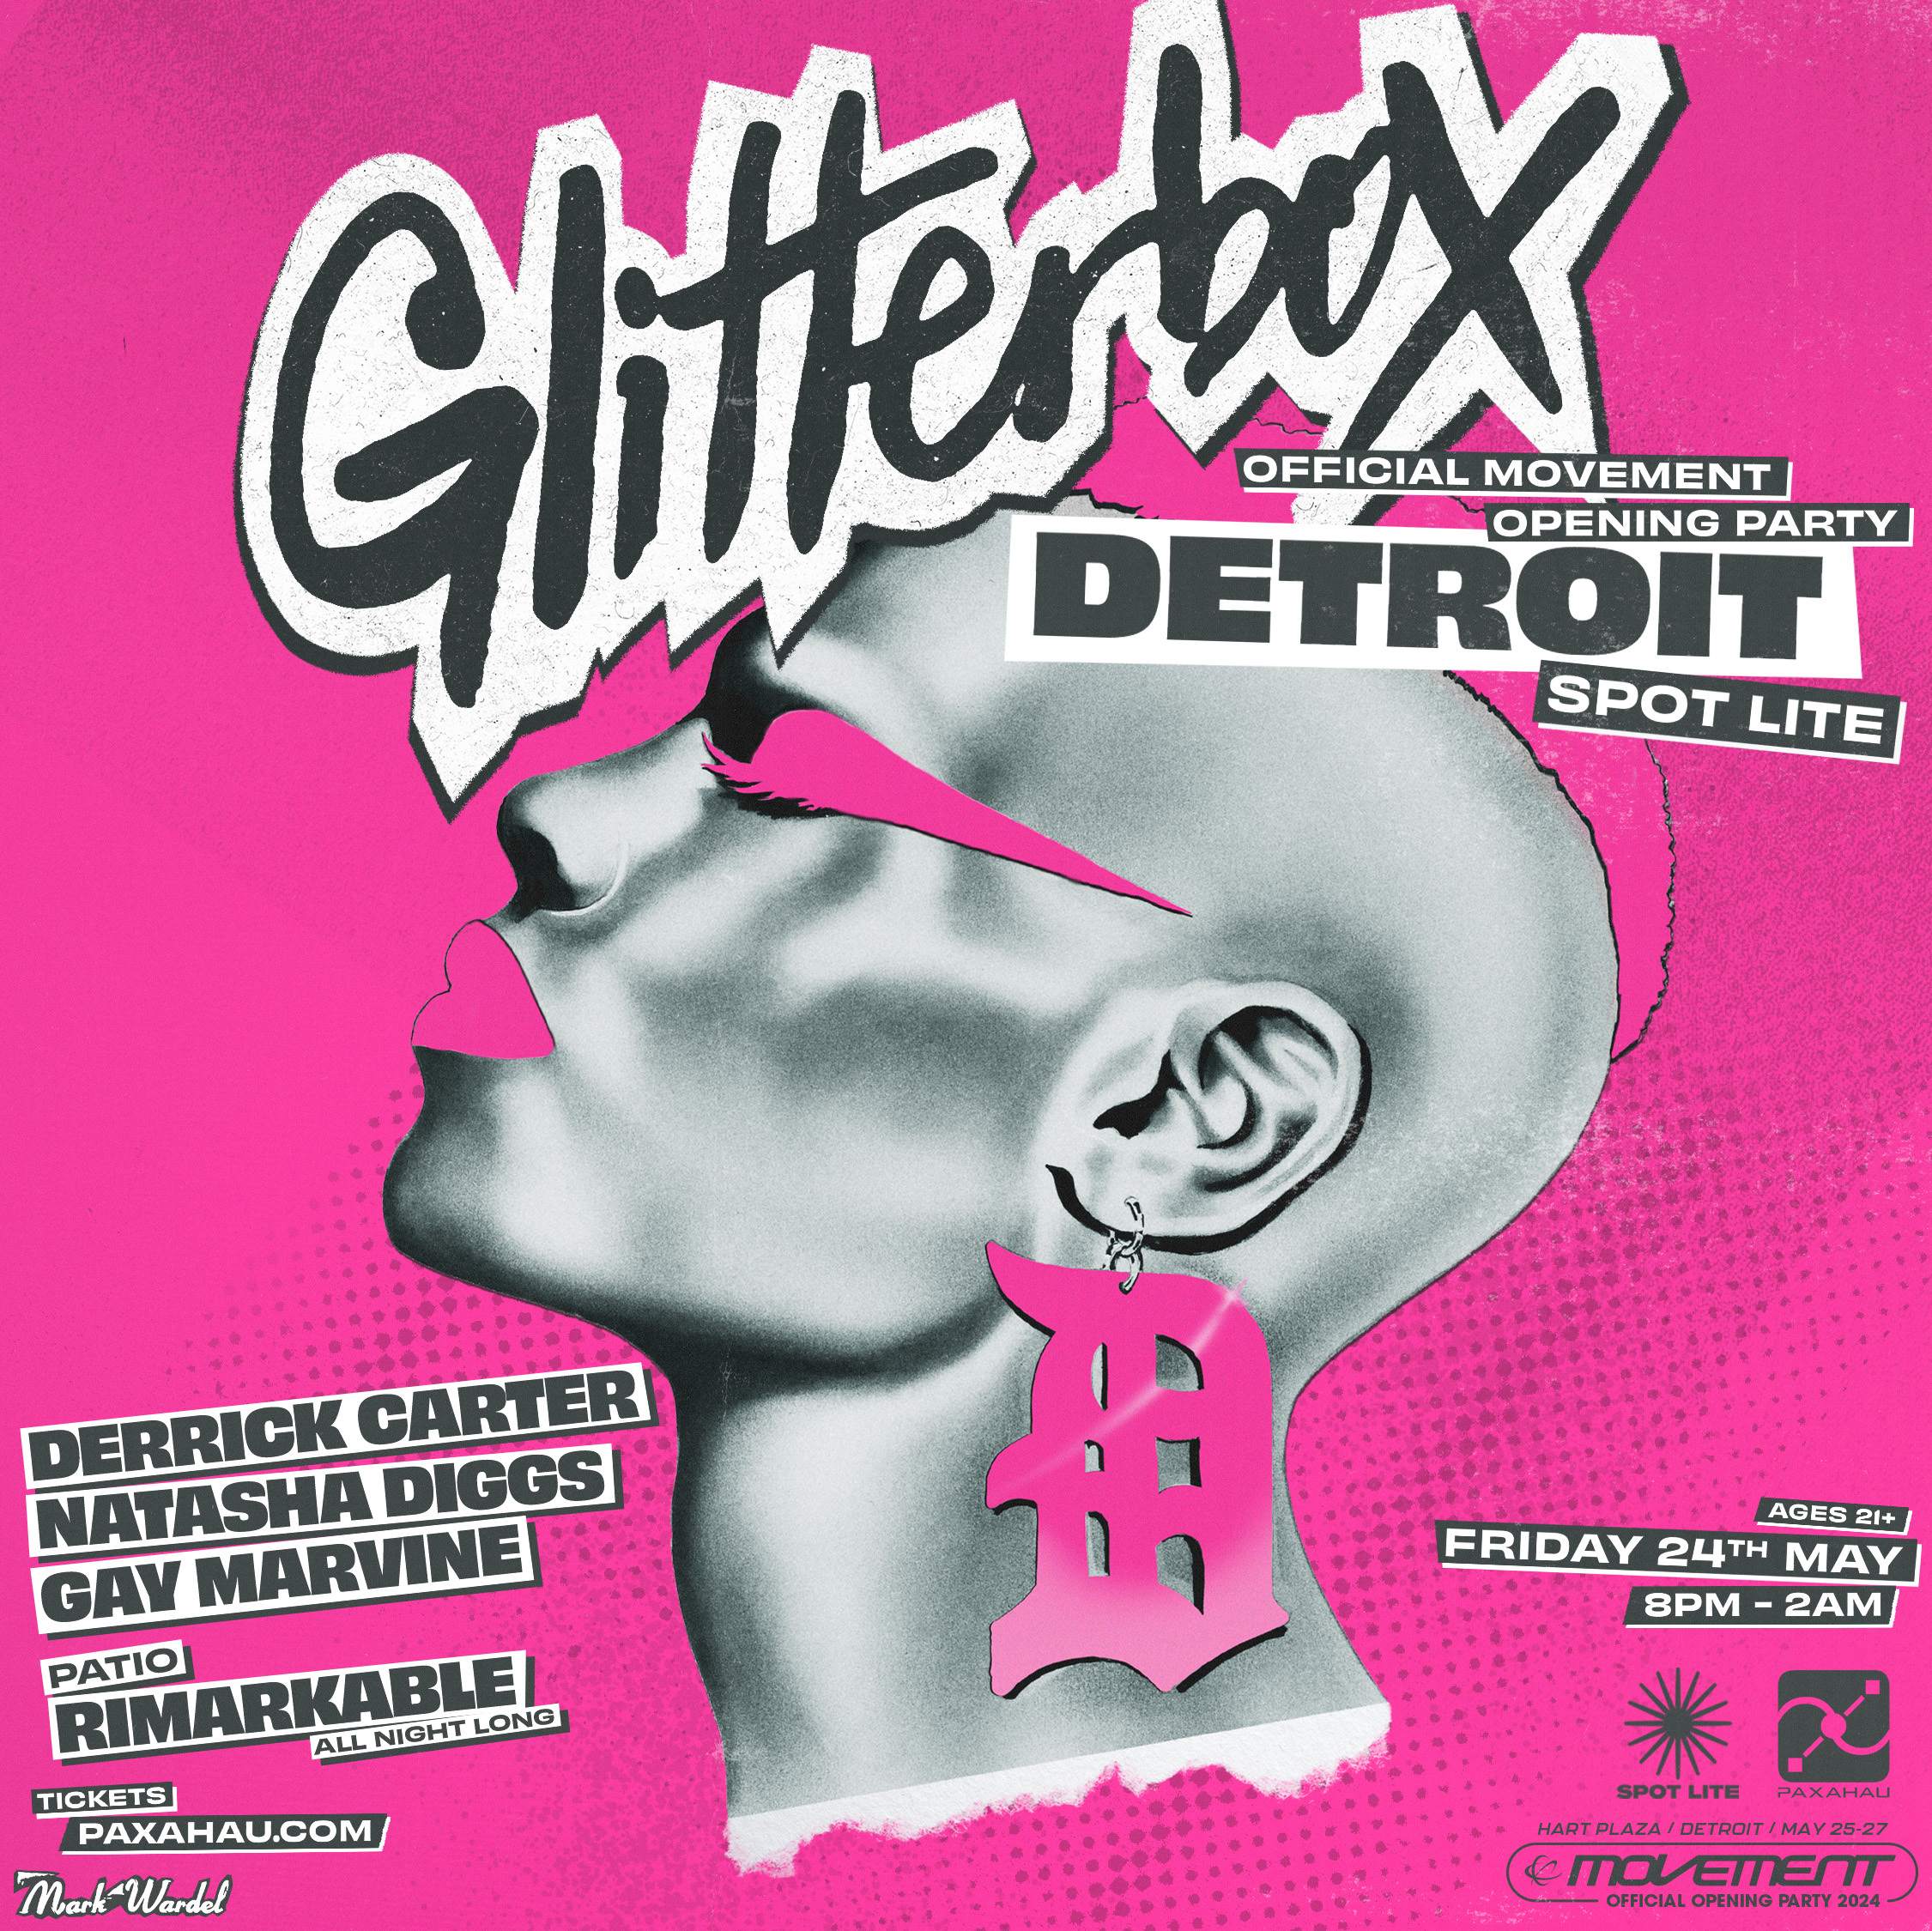 Glitterbox Detroit - Official Movement Opening Party - フライヤー表